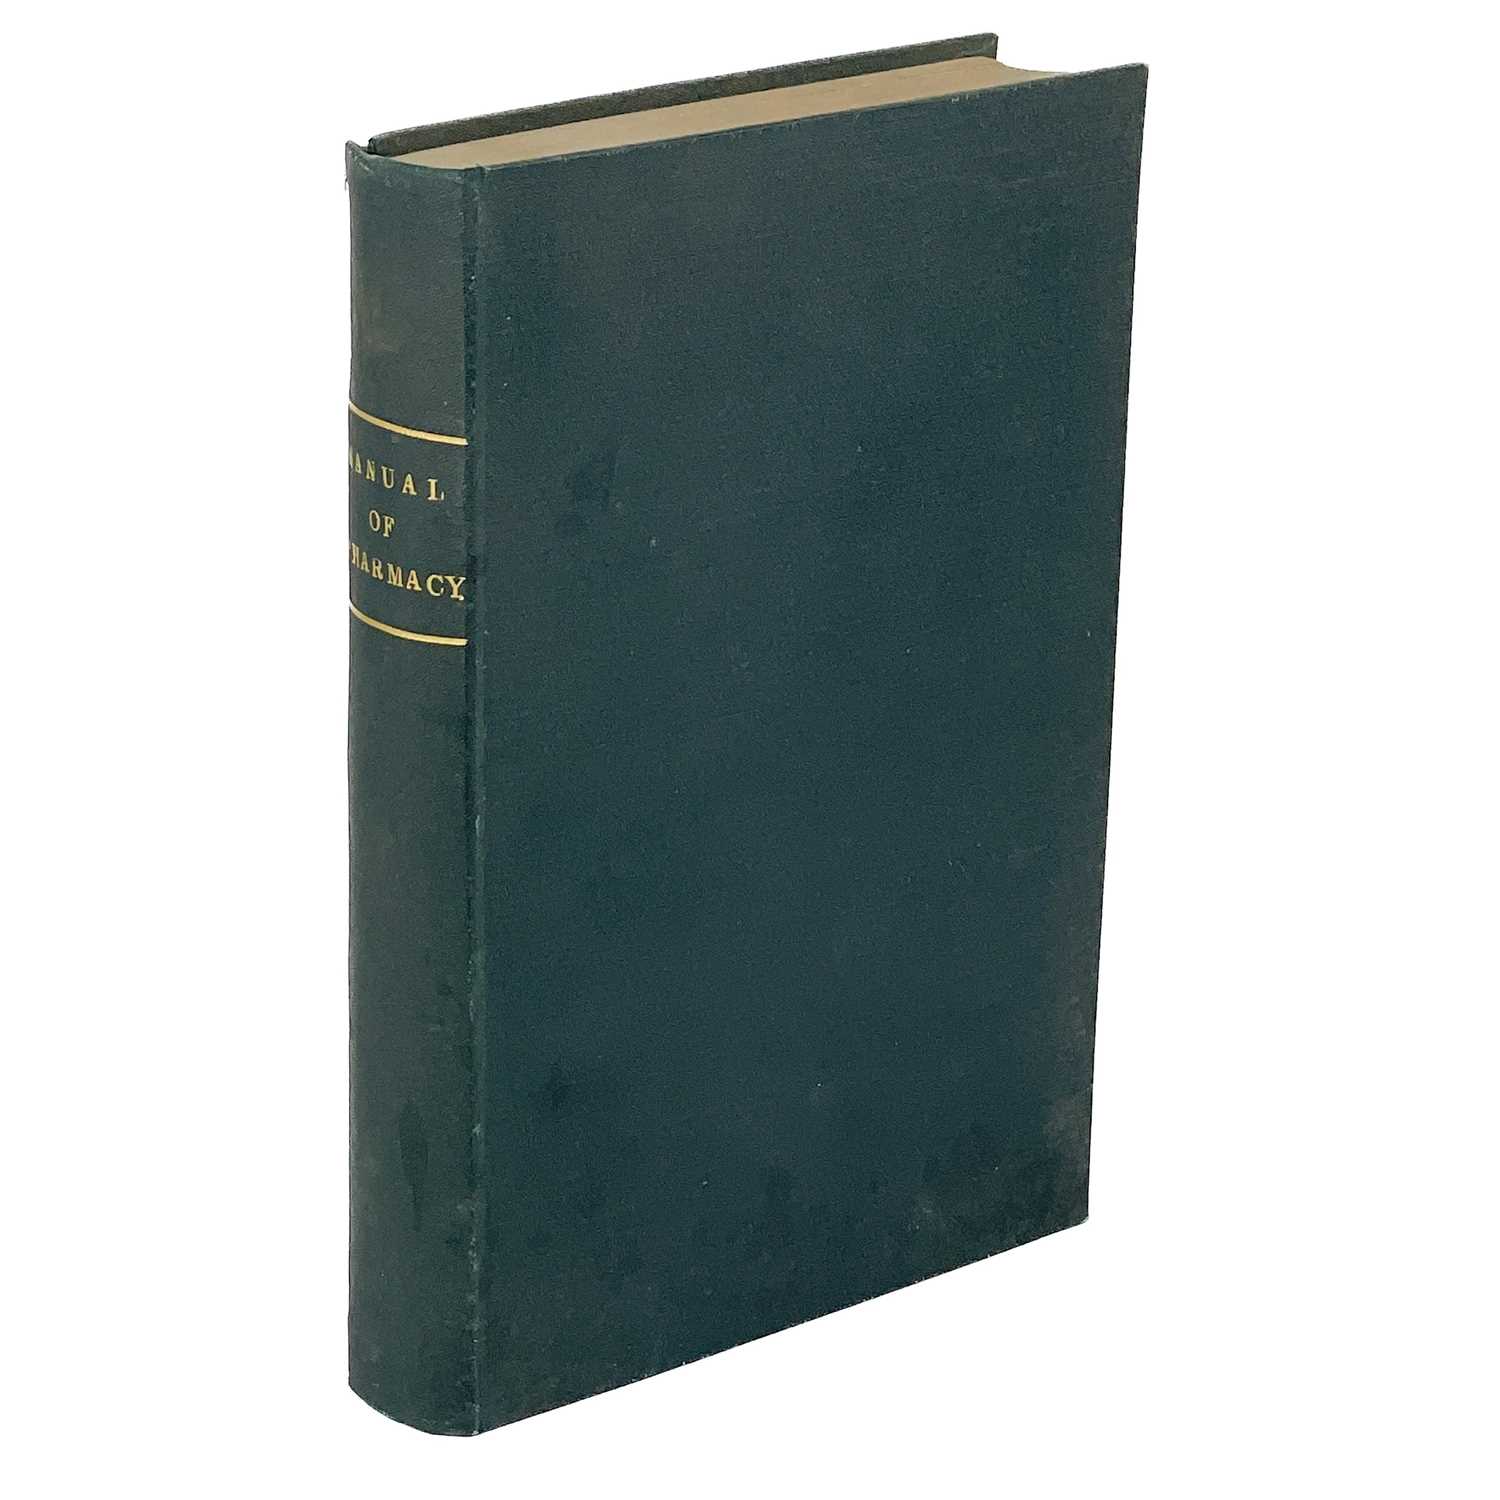 A MANUAL OF PHARMACY By William Thomas Brande (1829) - Image 10 of 10